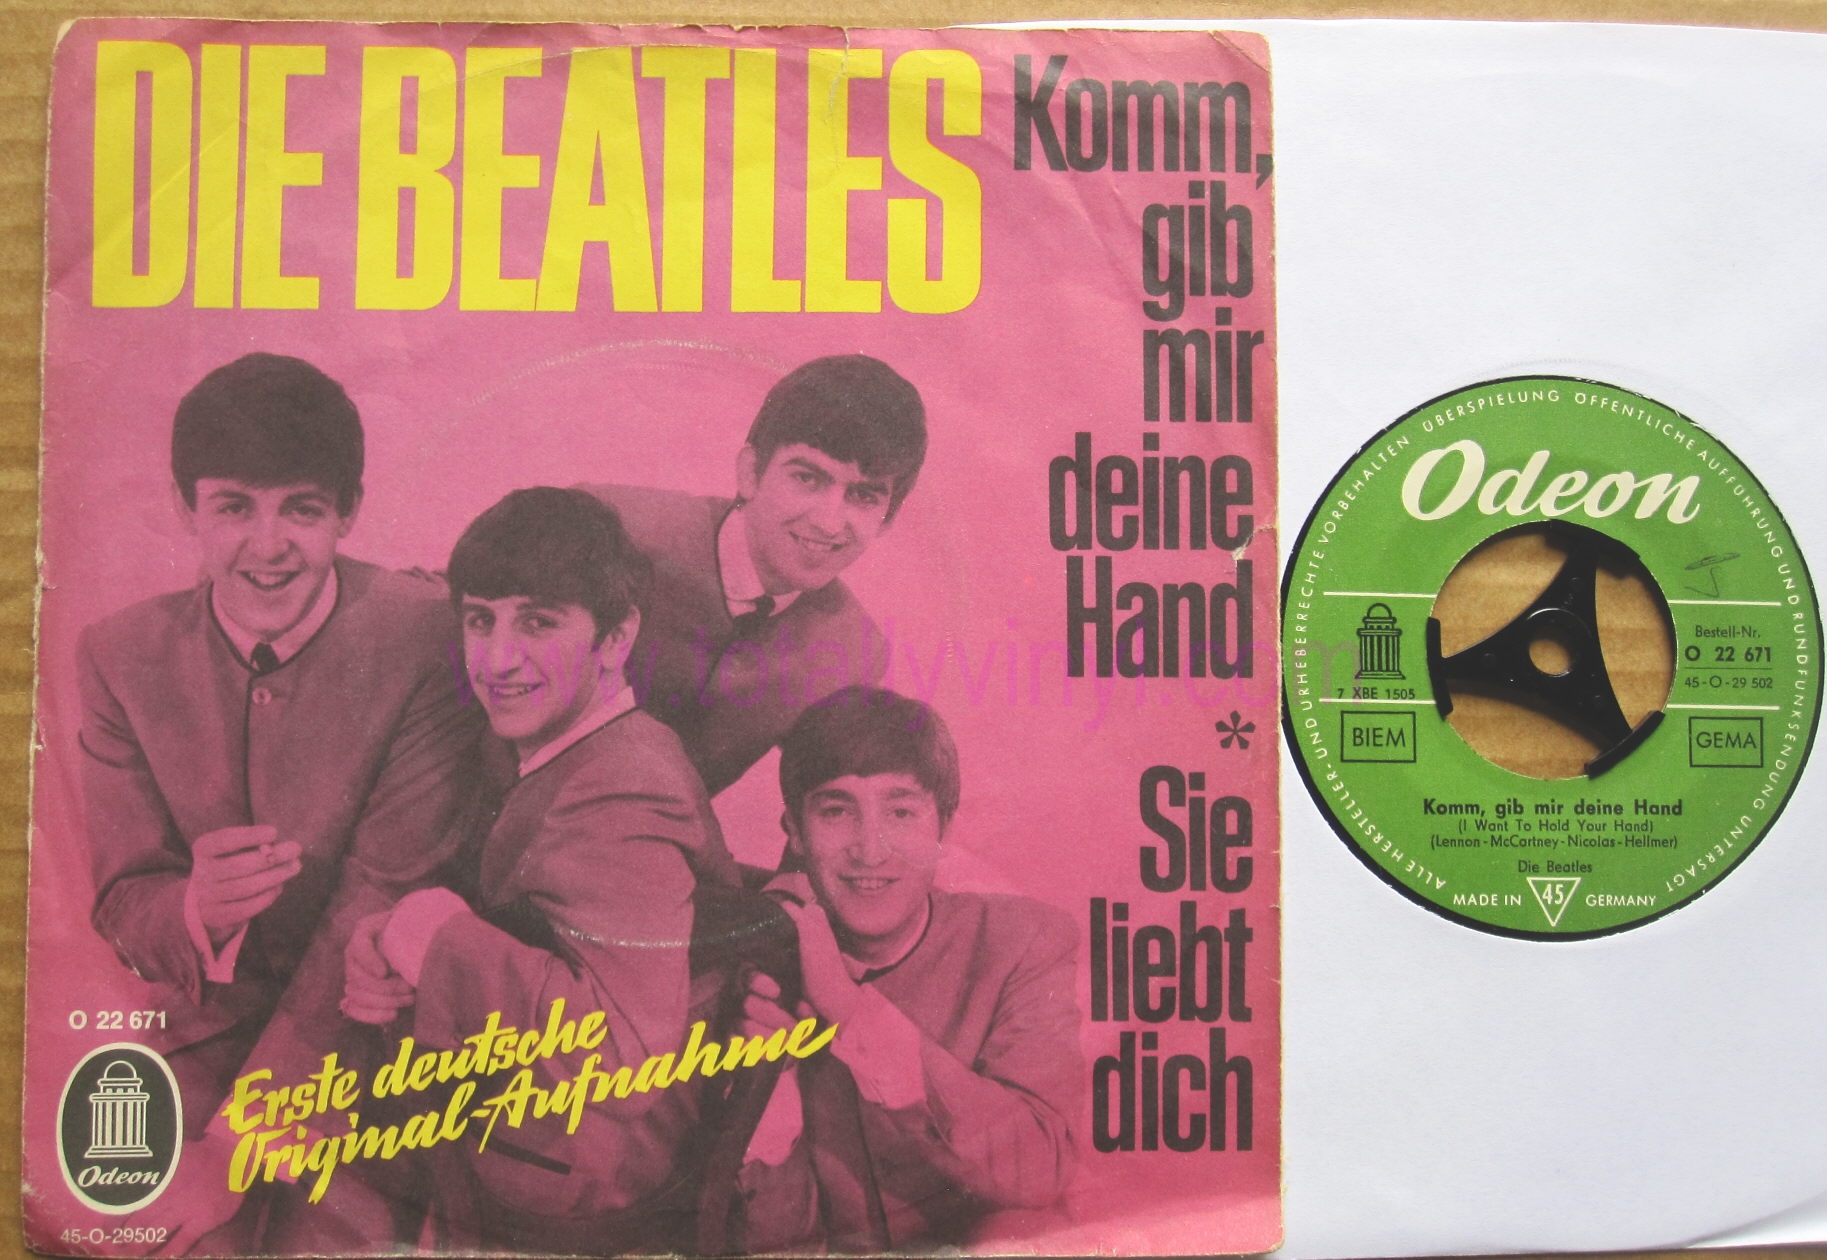 Mir deine. I want to hold your hand the Beatles. The Beatles Komm, GIB mir deine hand фото.